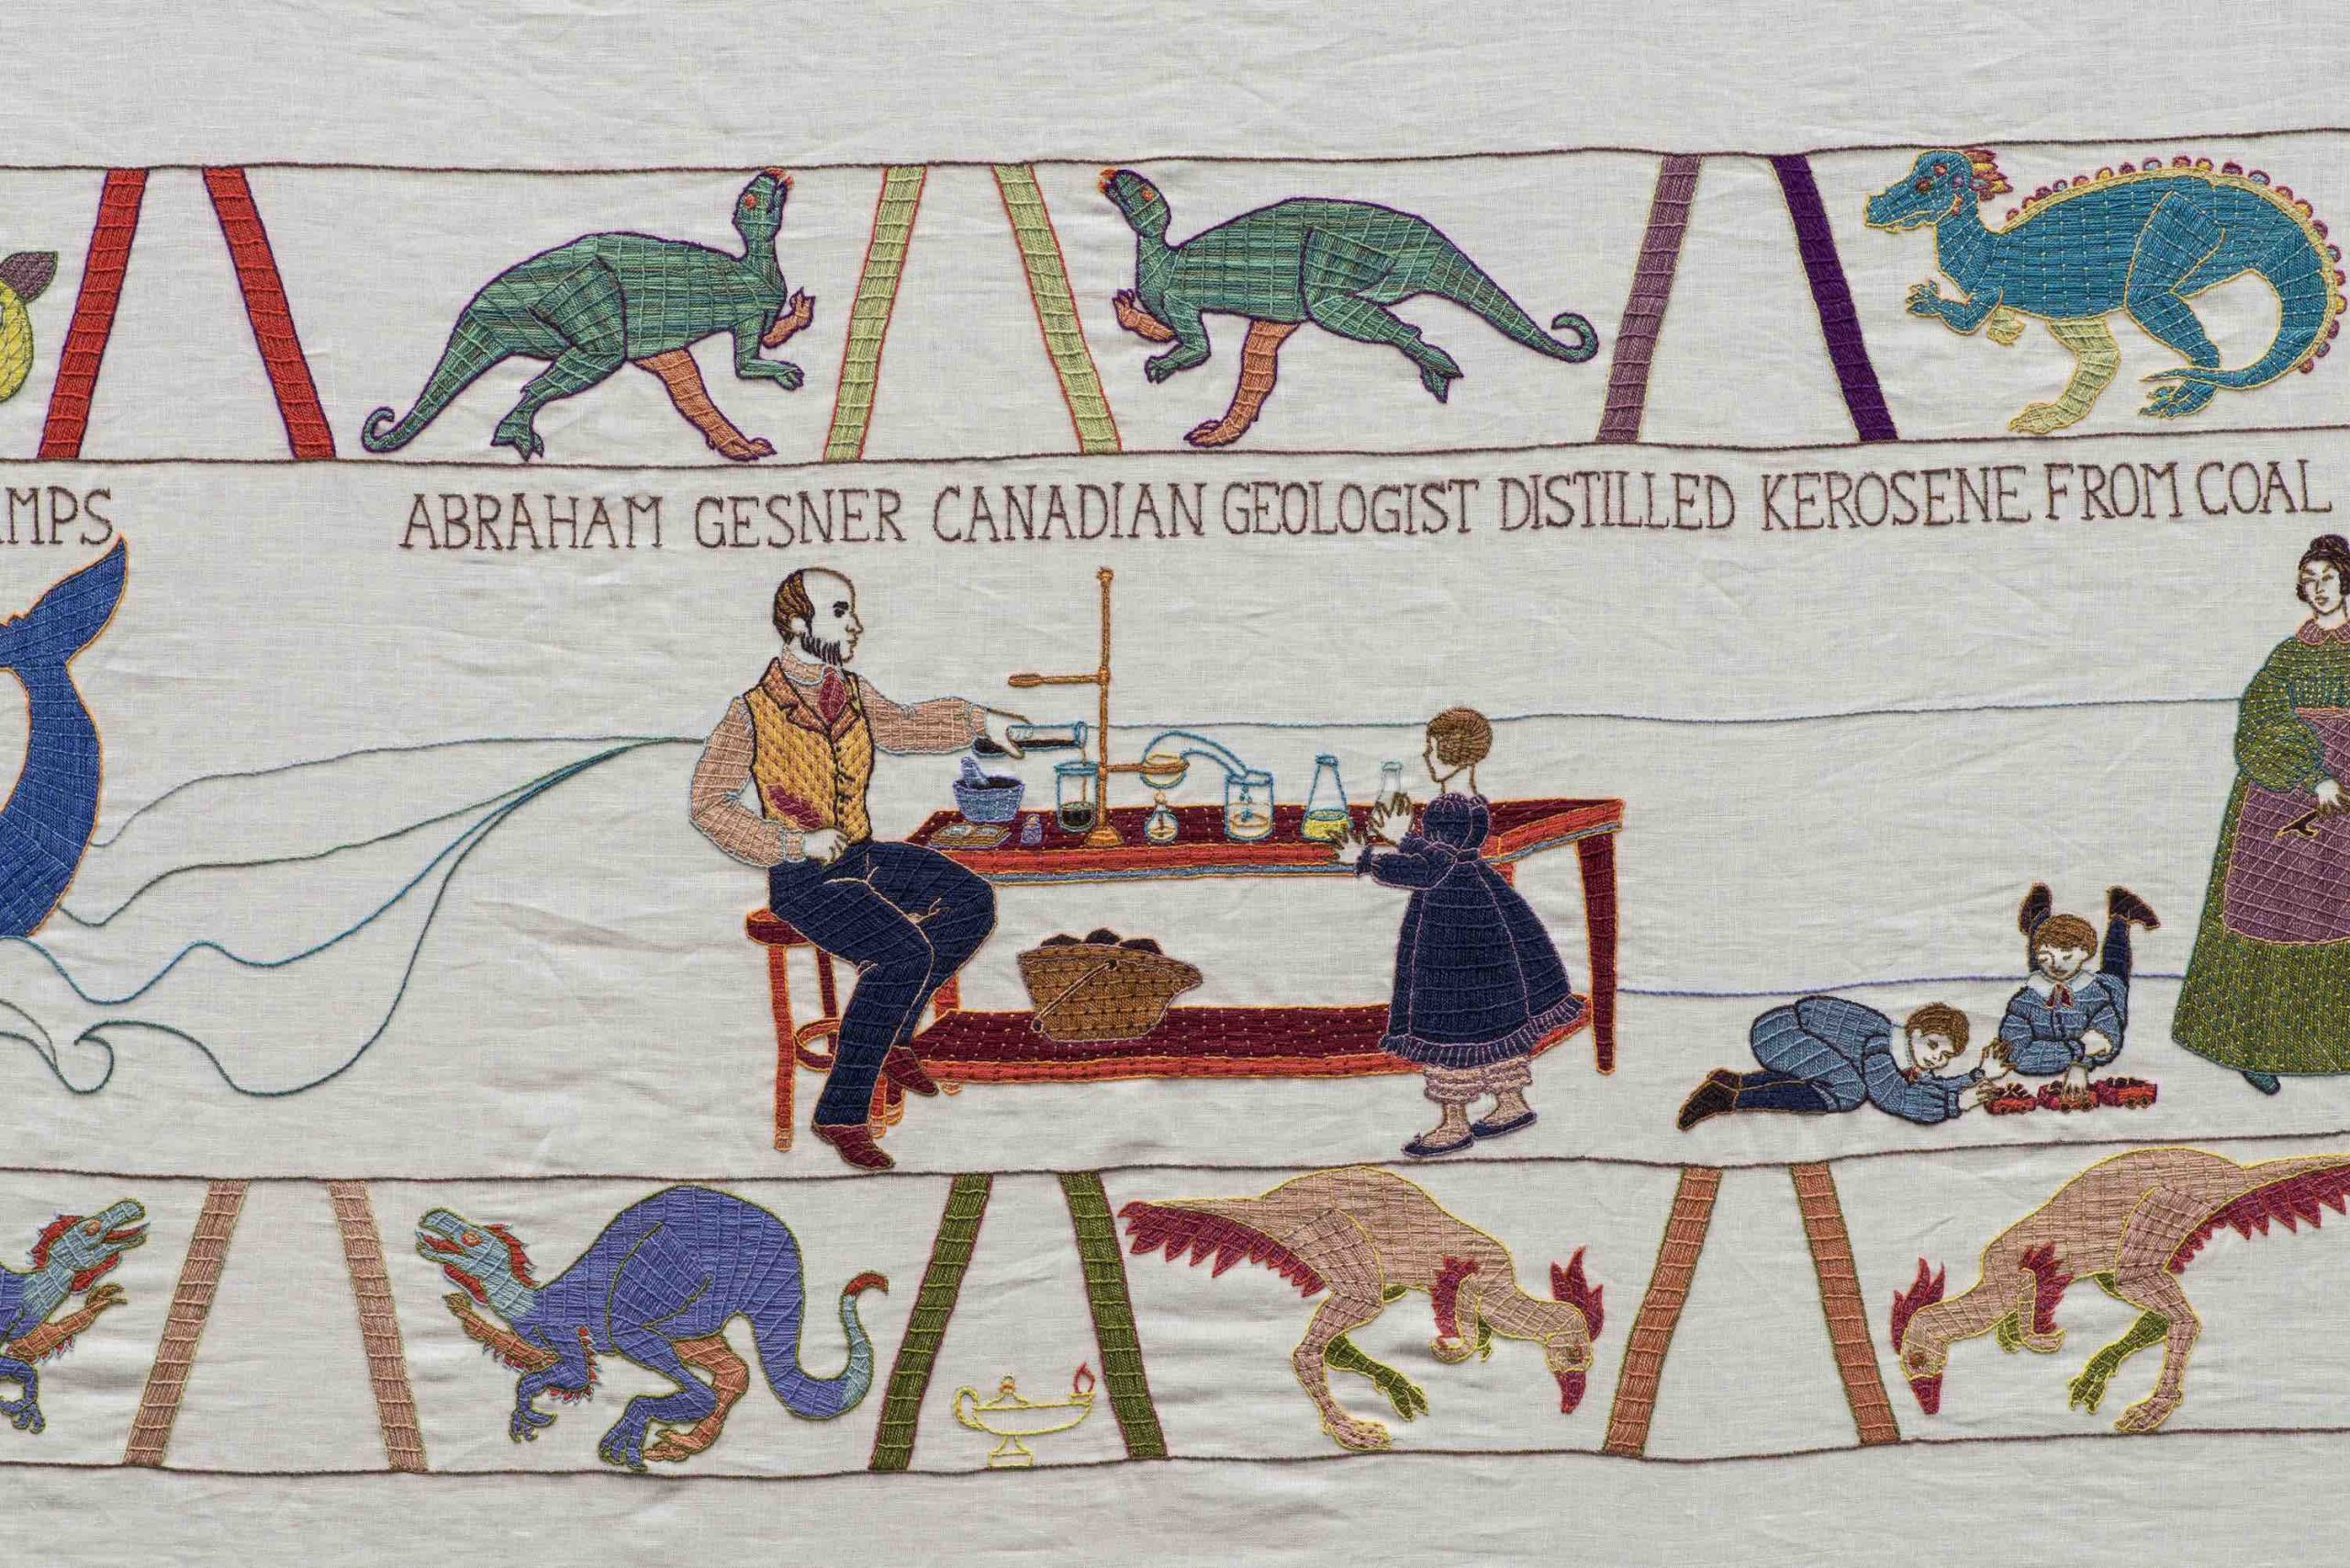 A man sits at a table performing a chemistry experiment as a young girl looks on with the words “Abraham Gesner Canadian Geologist Distilled Kerosene from Coal” written above them